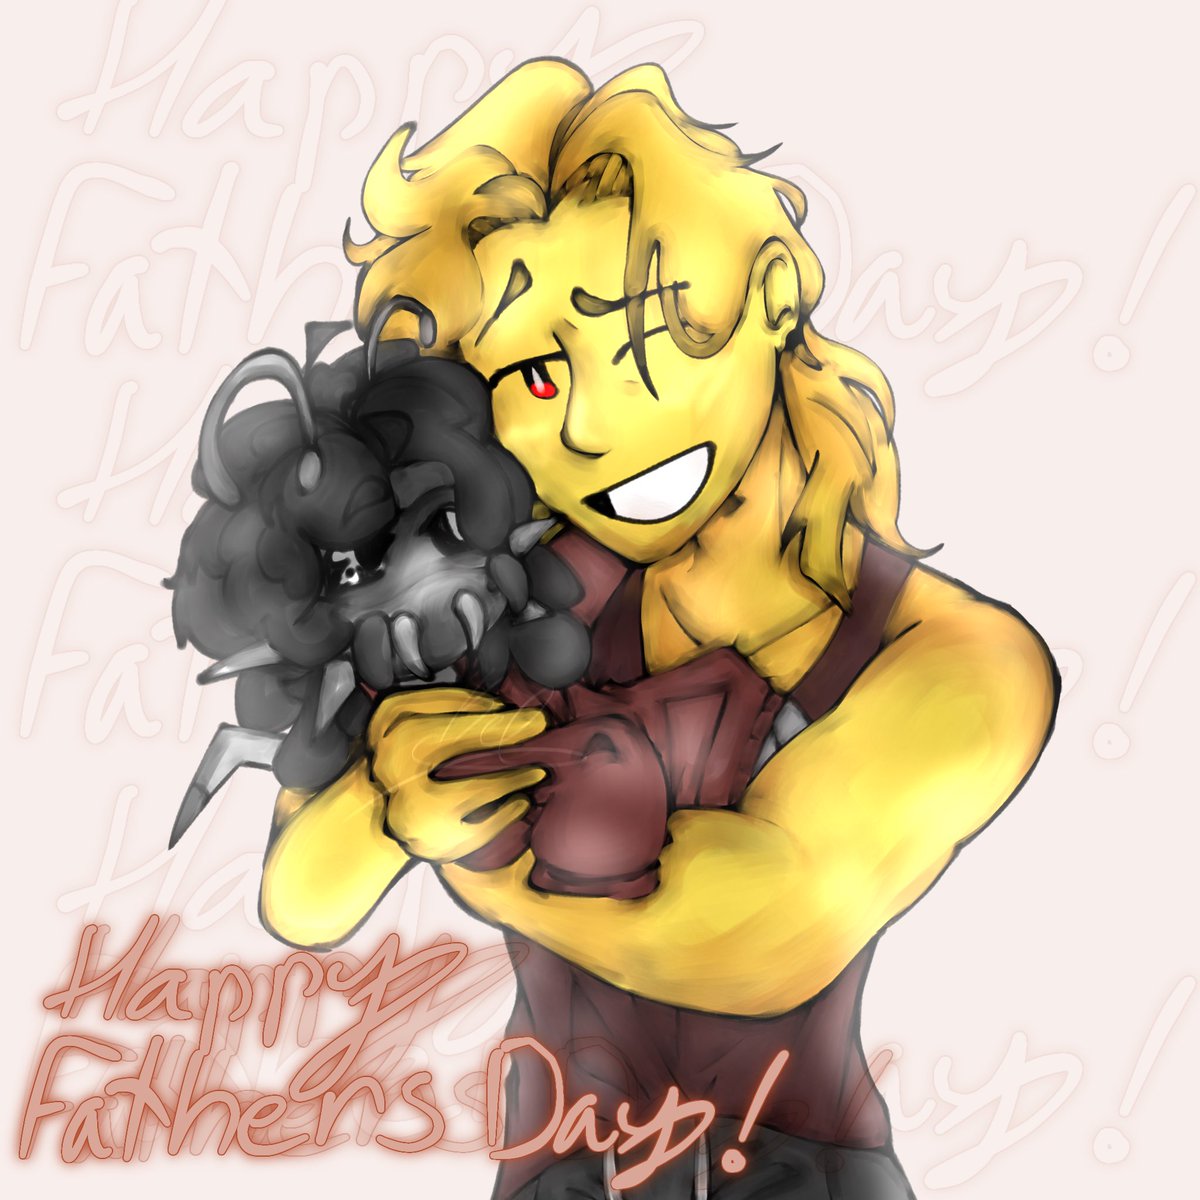 Happy Fathers Day everyone! #pghlfilmsfanart